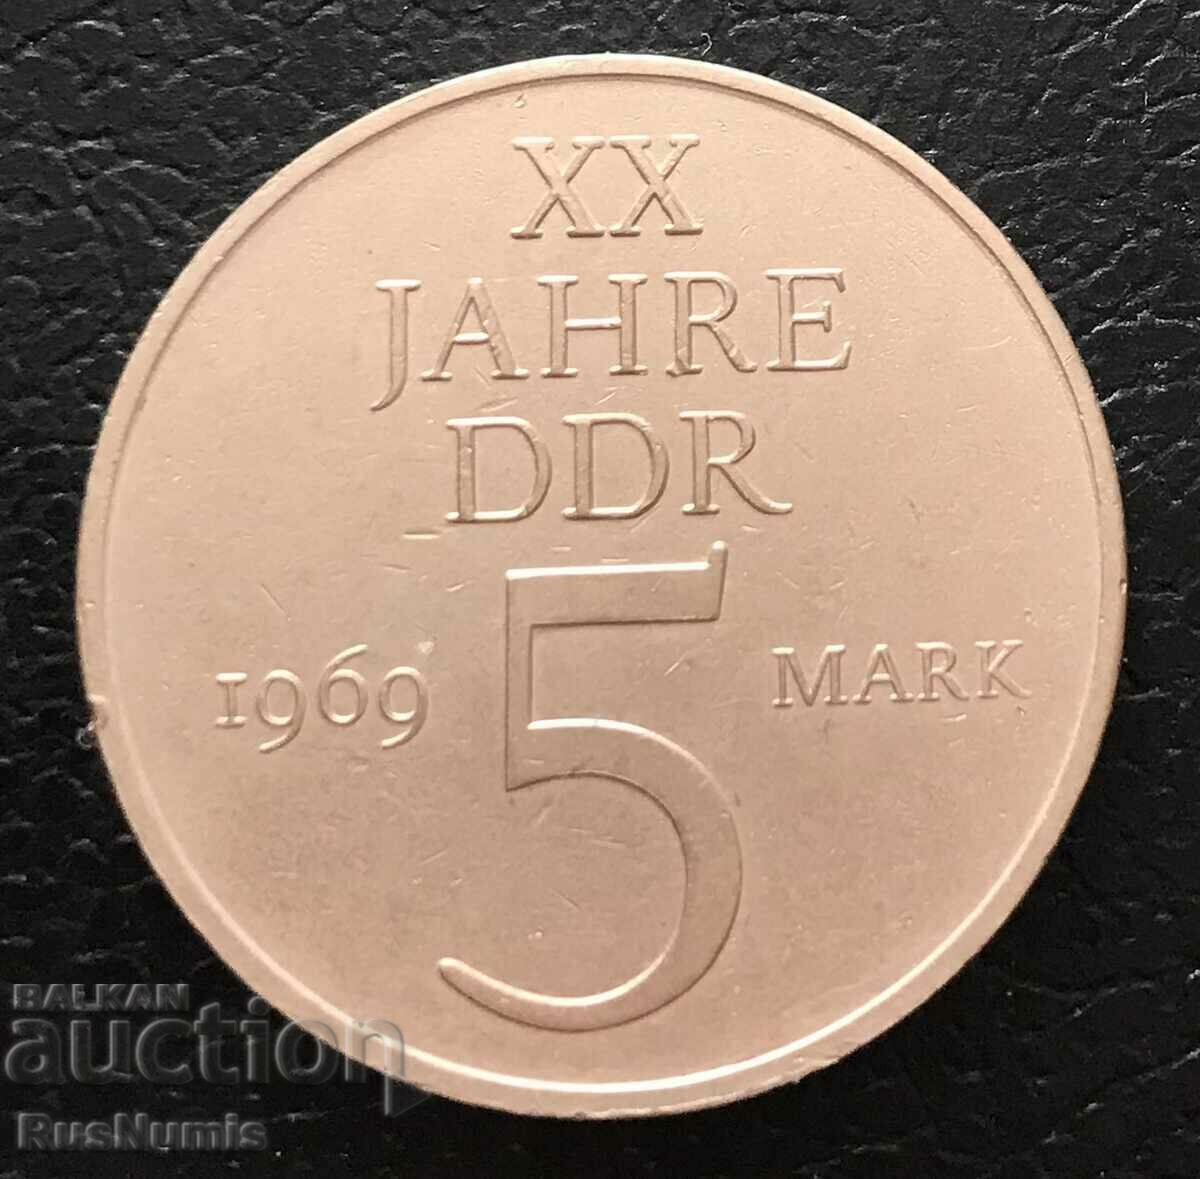 GDR. 5 stamps 1969 20 year GDR. COPPER-NICKEL. RARE!